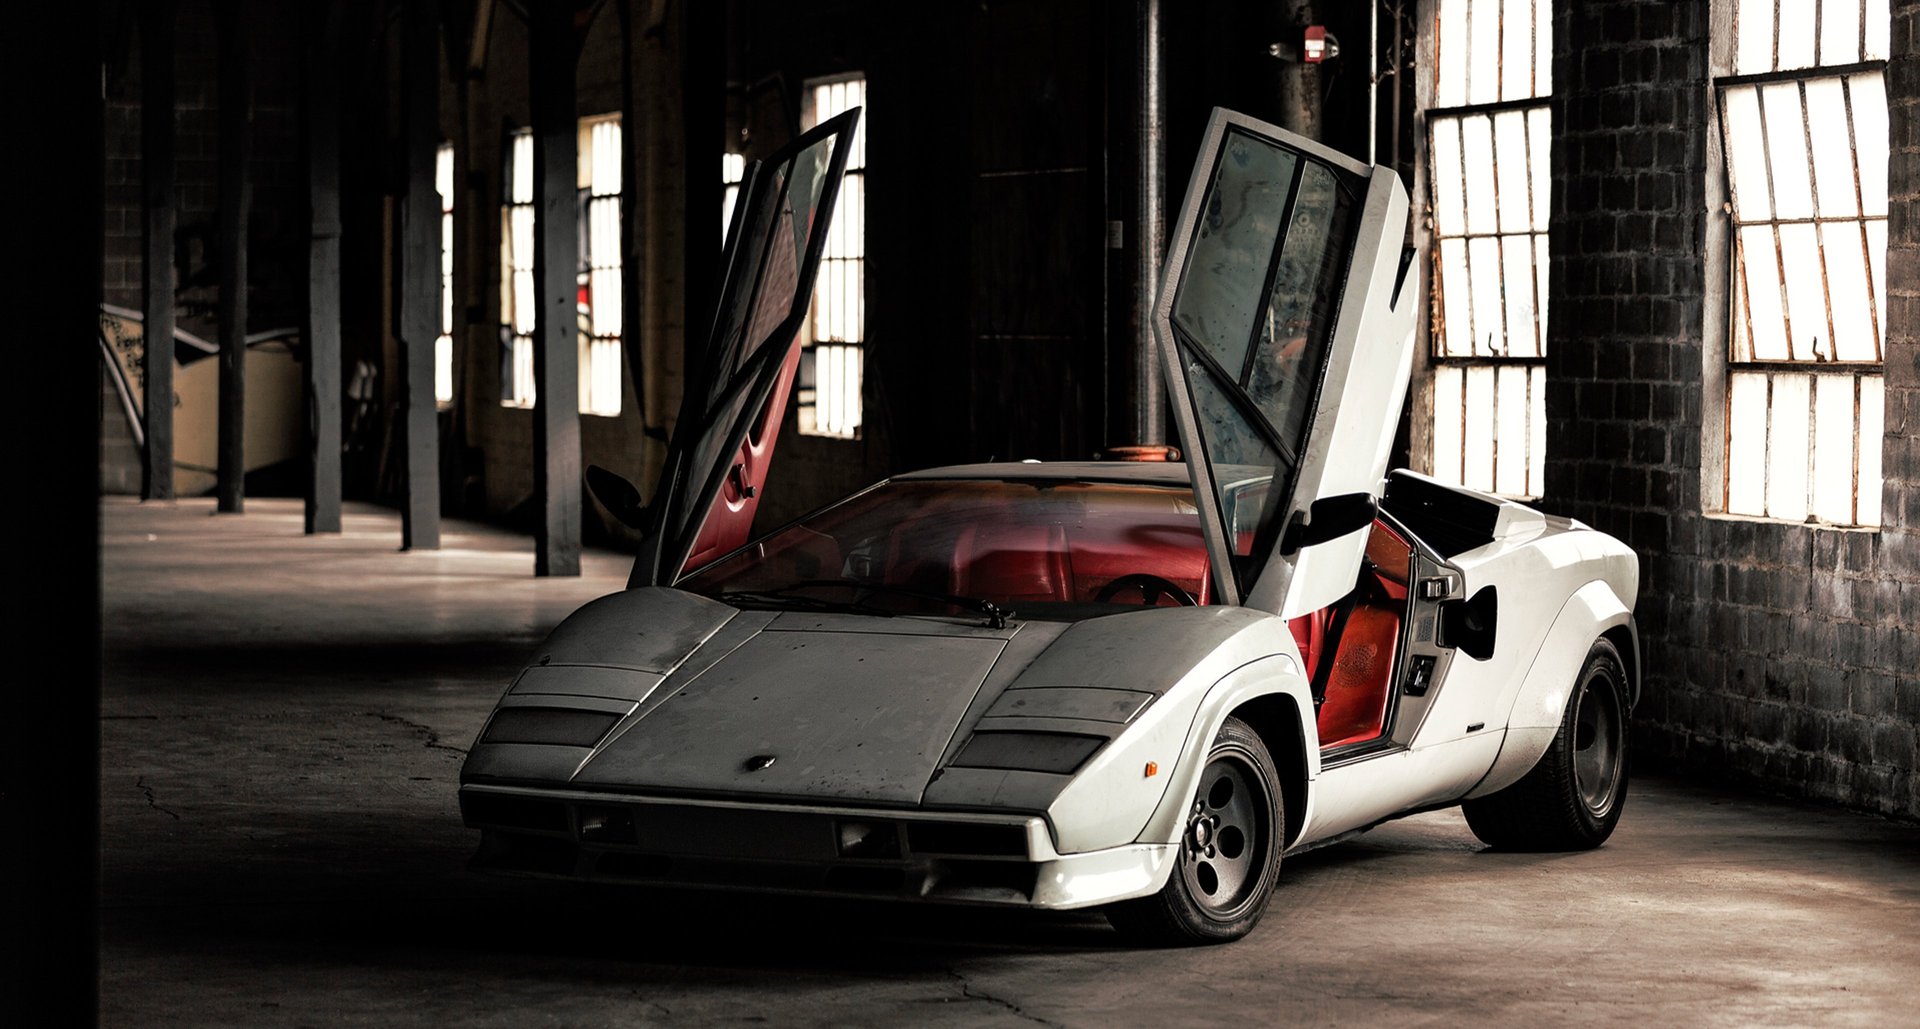 https://www.classicdriver.com/cdn-cgi/image/format=auto,fit=cover,width=1920,height=1029/sites/default/files/article_images/barnfindcountach0.jpg